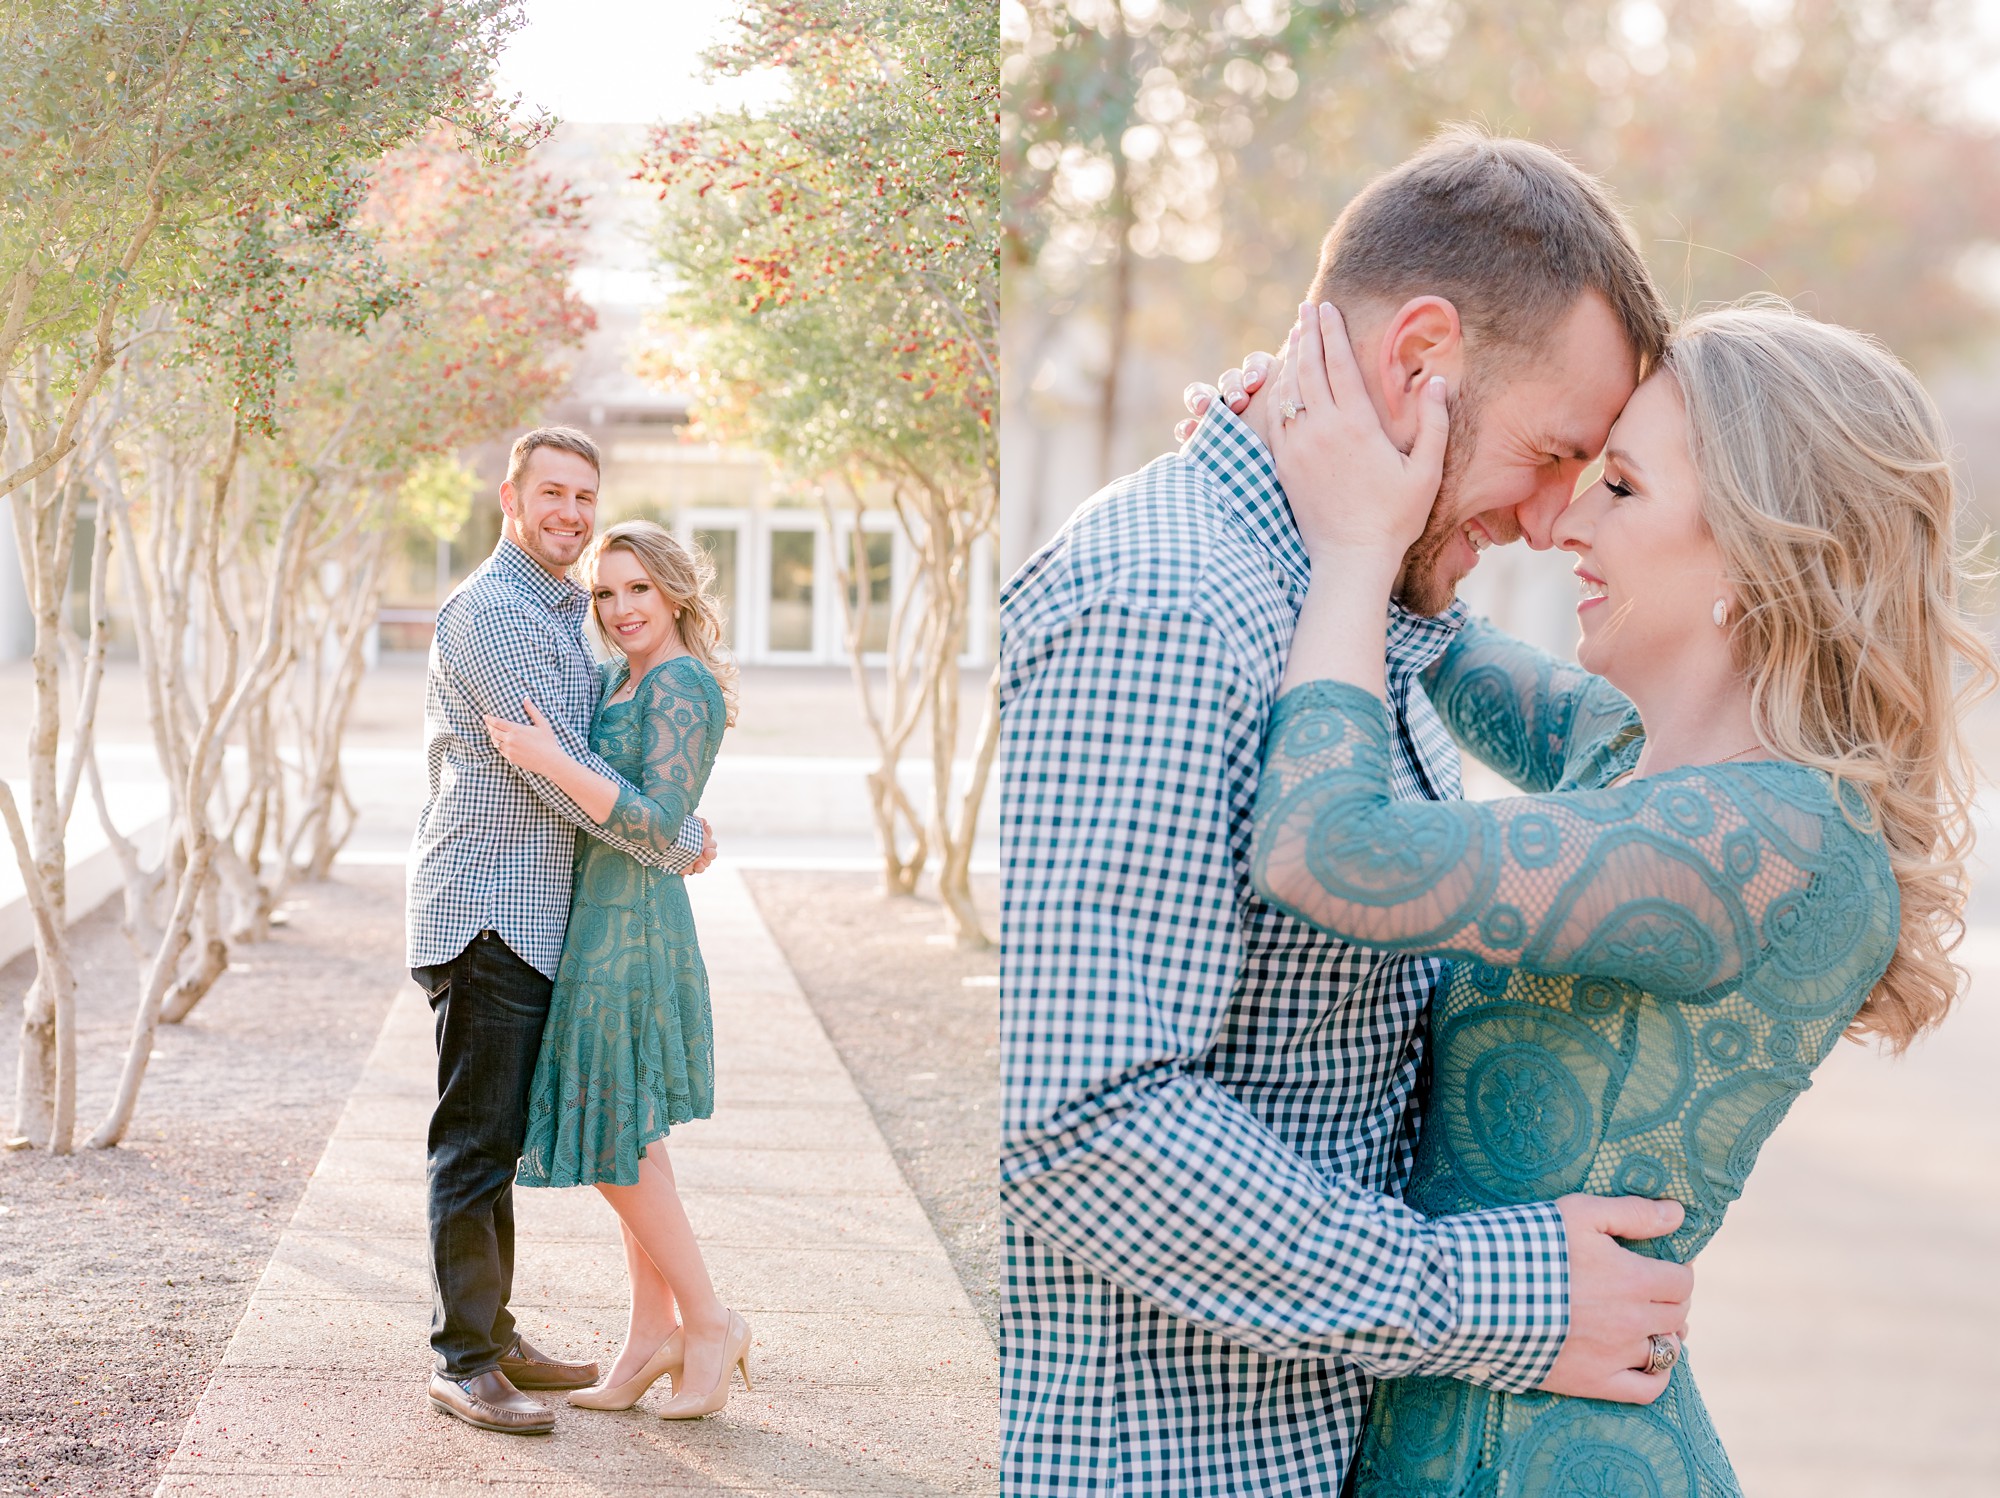 Kimbell Art Museum Engagement Photos in Fort Worth